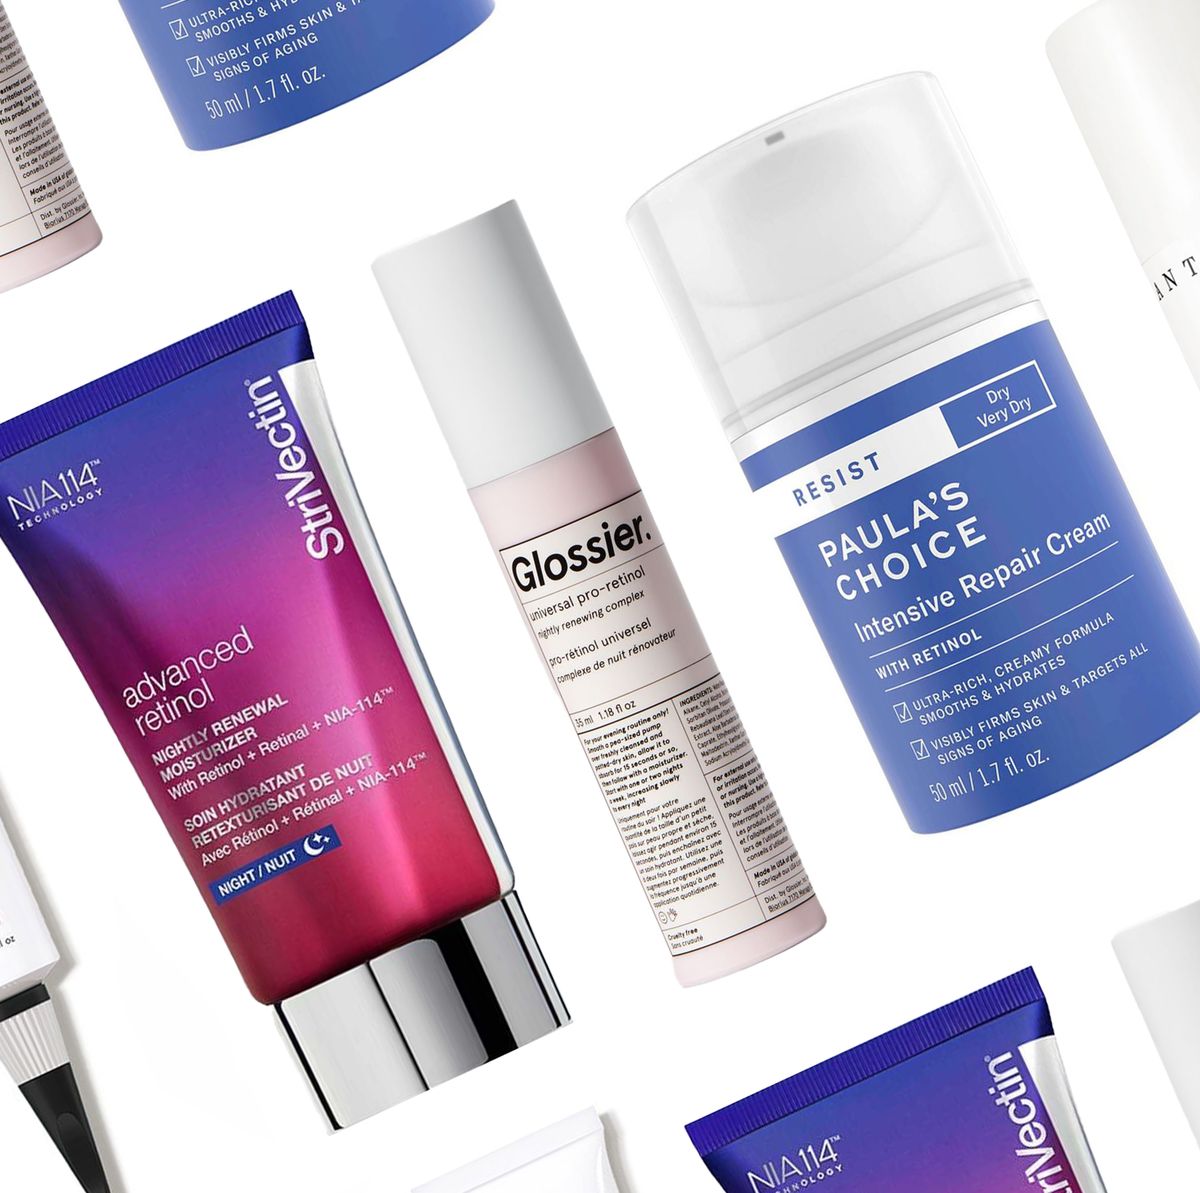 strå perforere Dalset The 19 Best Retinol Creams to Shop in 2023: Murad, Olay, More